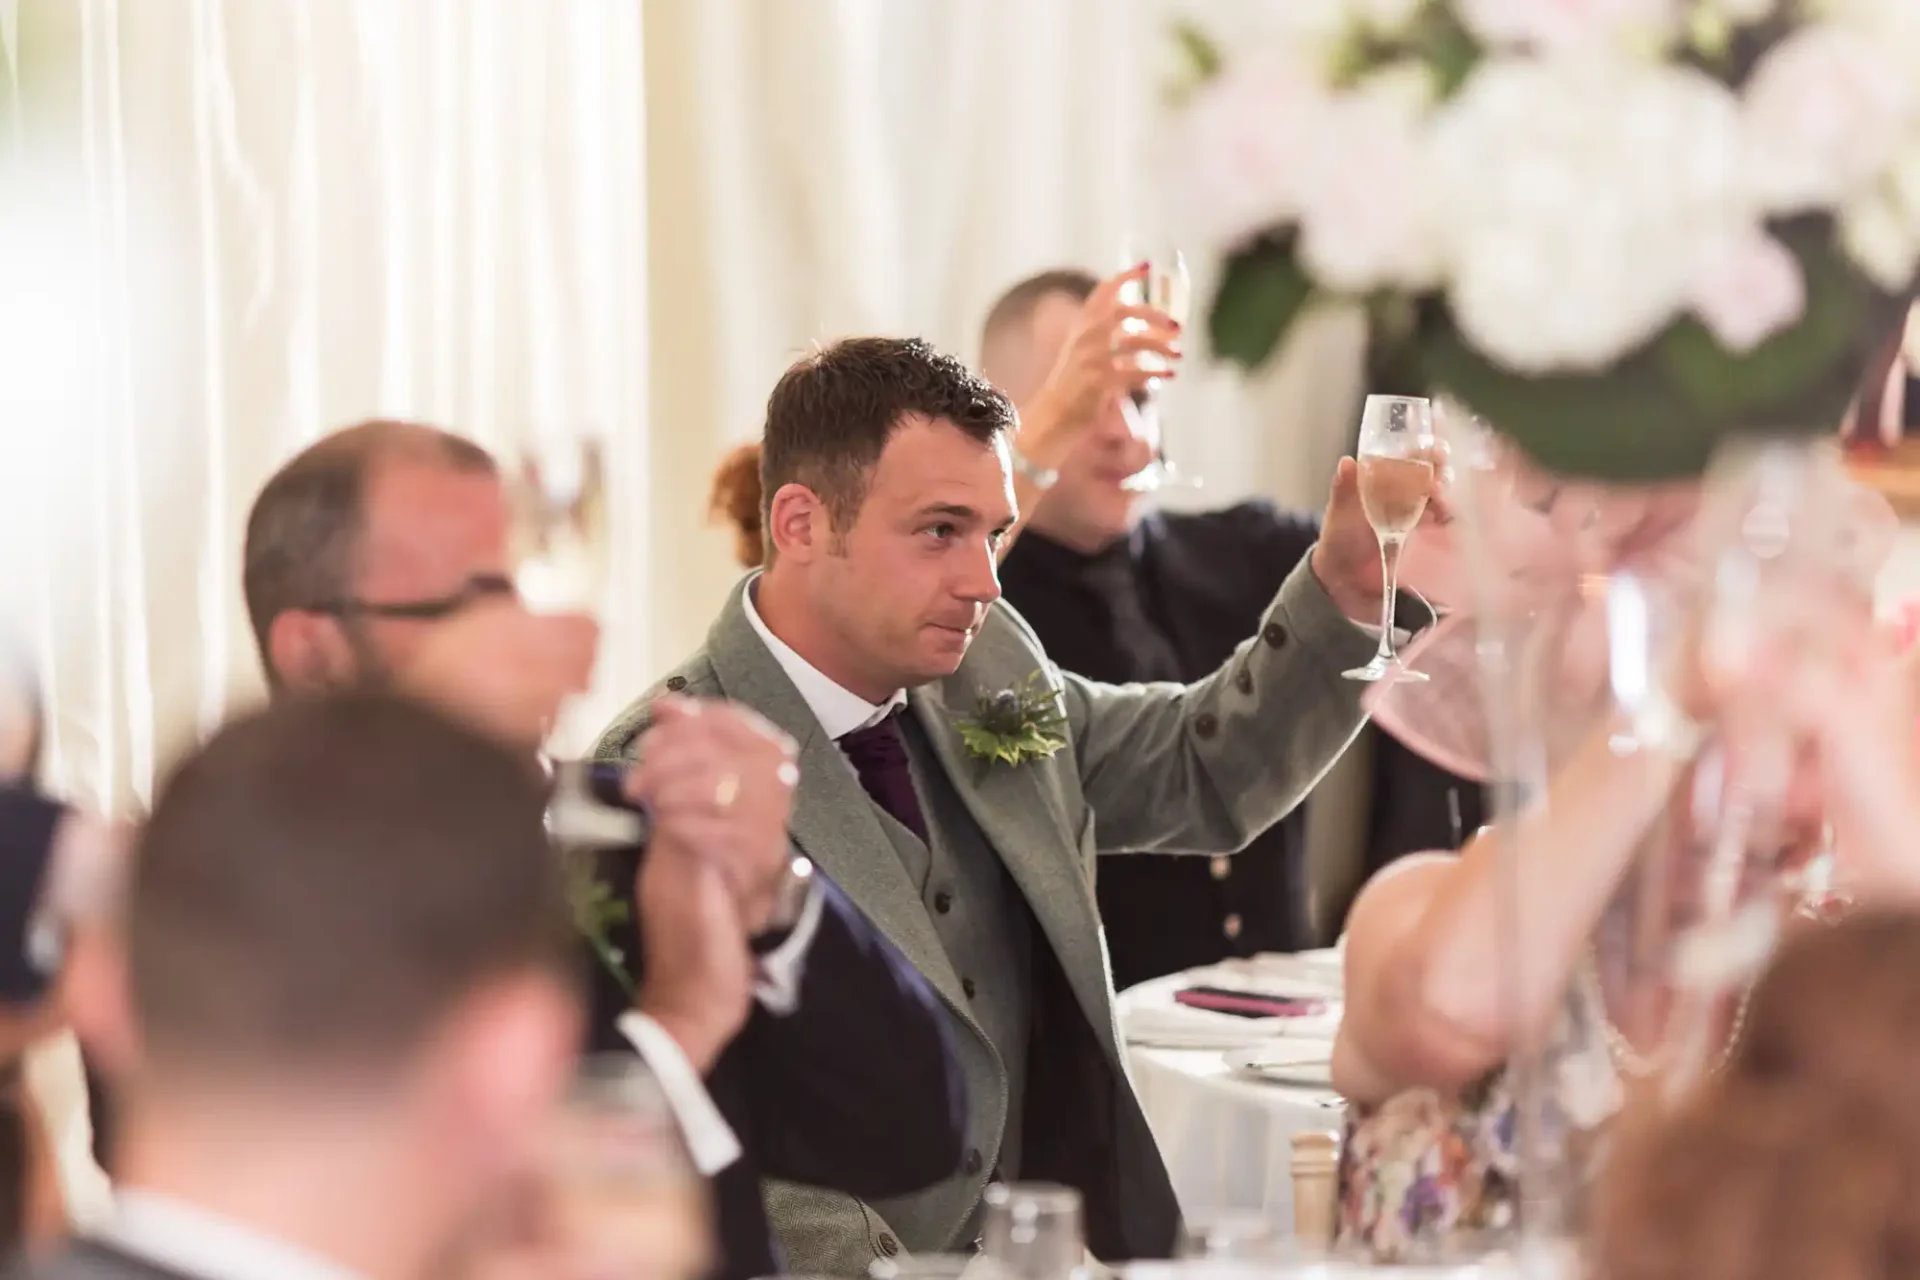 A man in a grey suit raising a toast with a glass of wine at a wedding reception, surrounded by guests.